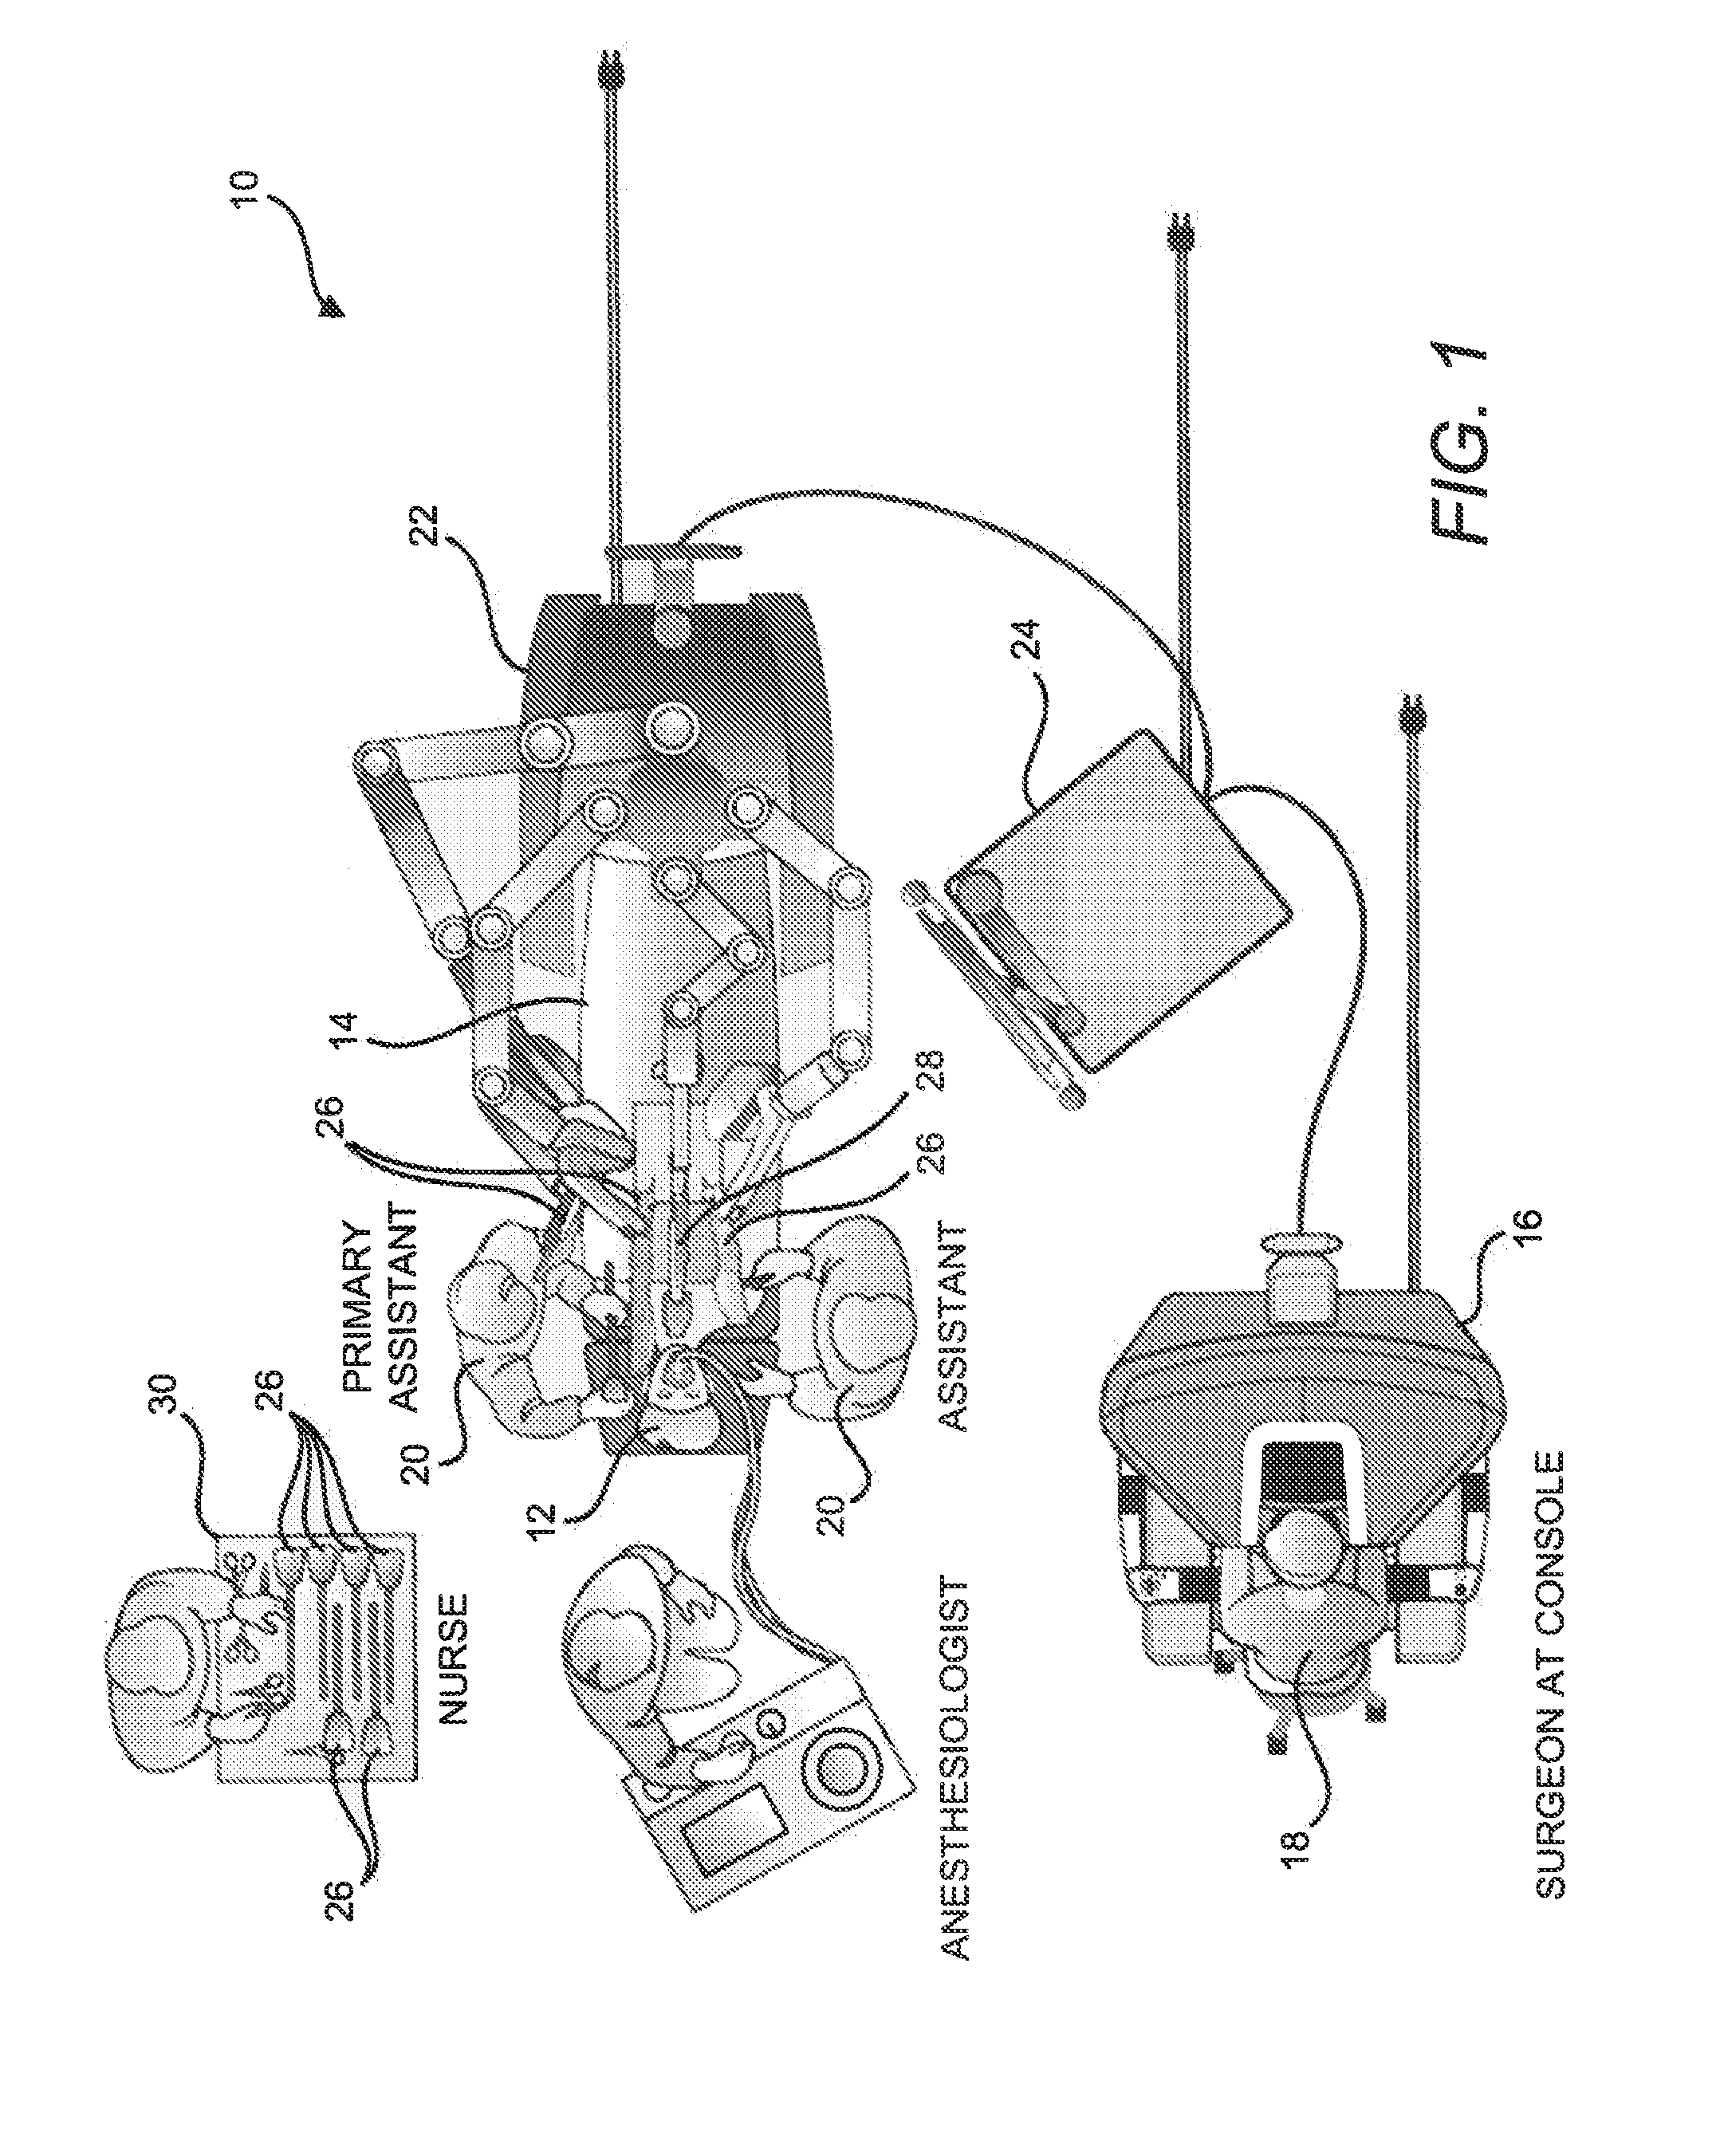 Motor interface for parallel drive shafts within an independently rotating member